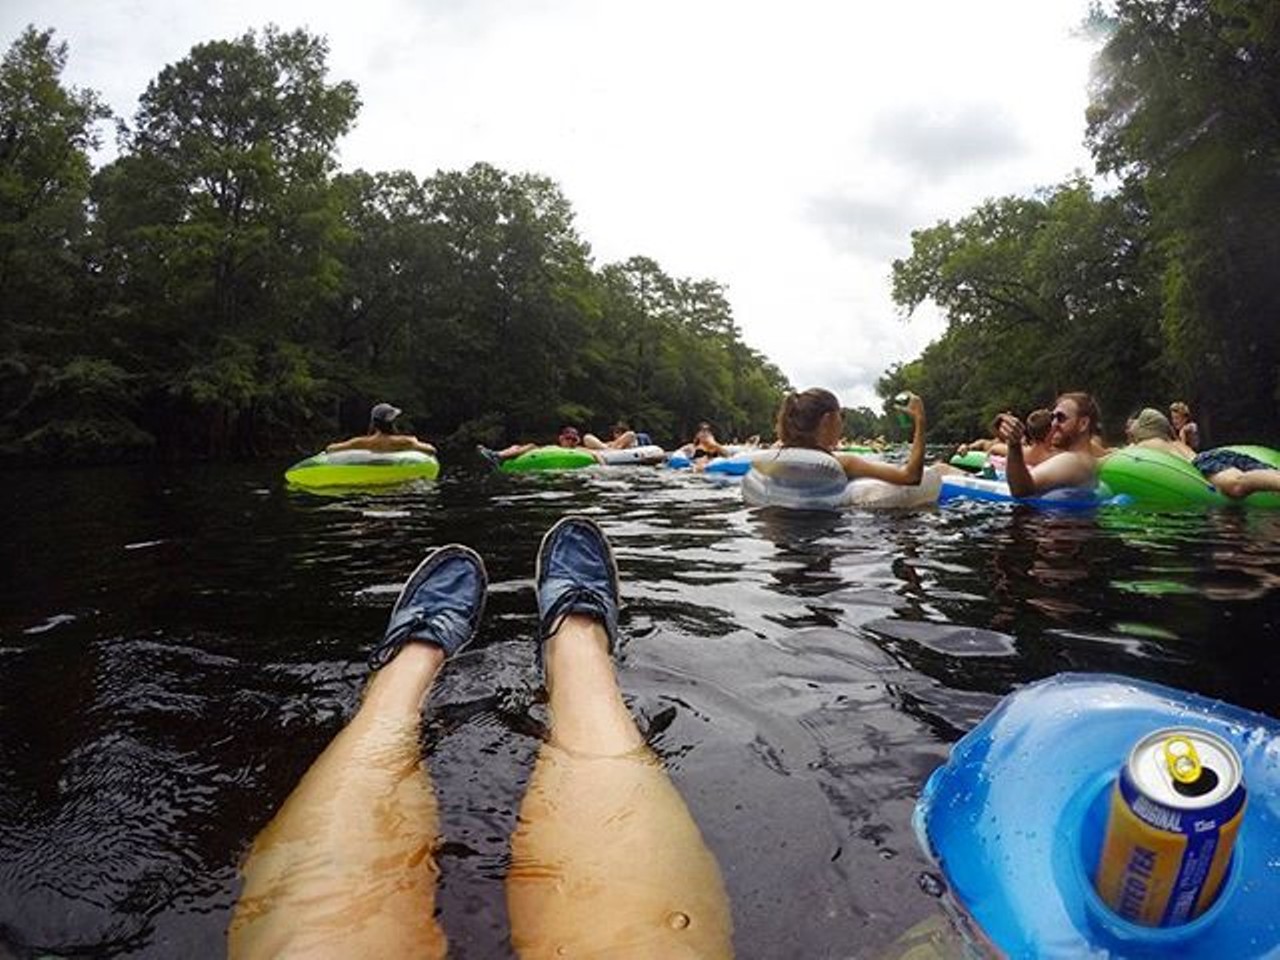  Bring some cold ones to Ginnie Springs
7300 Ginnie Springs Rd, High Springs,(386) 454-7188 
This 200 acre site has seven springs, but more notably is its deep underwater caves. Have a couple drinks with some pals, jump in the water, and see what lies below. 
Photo via sunlashine/Instagram